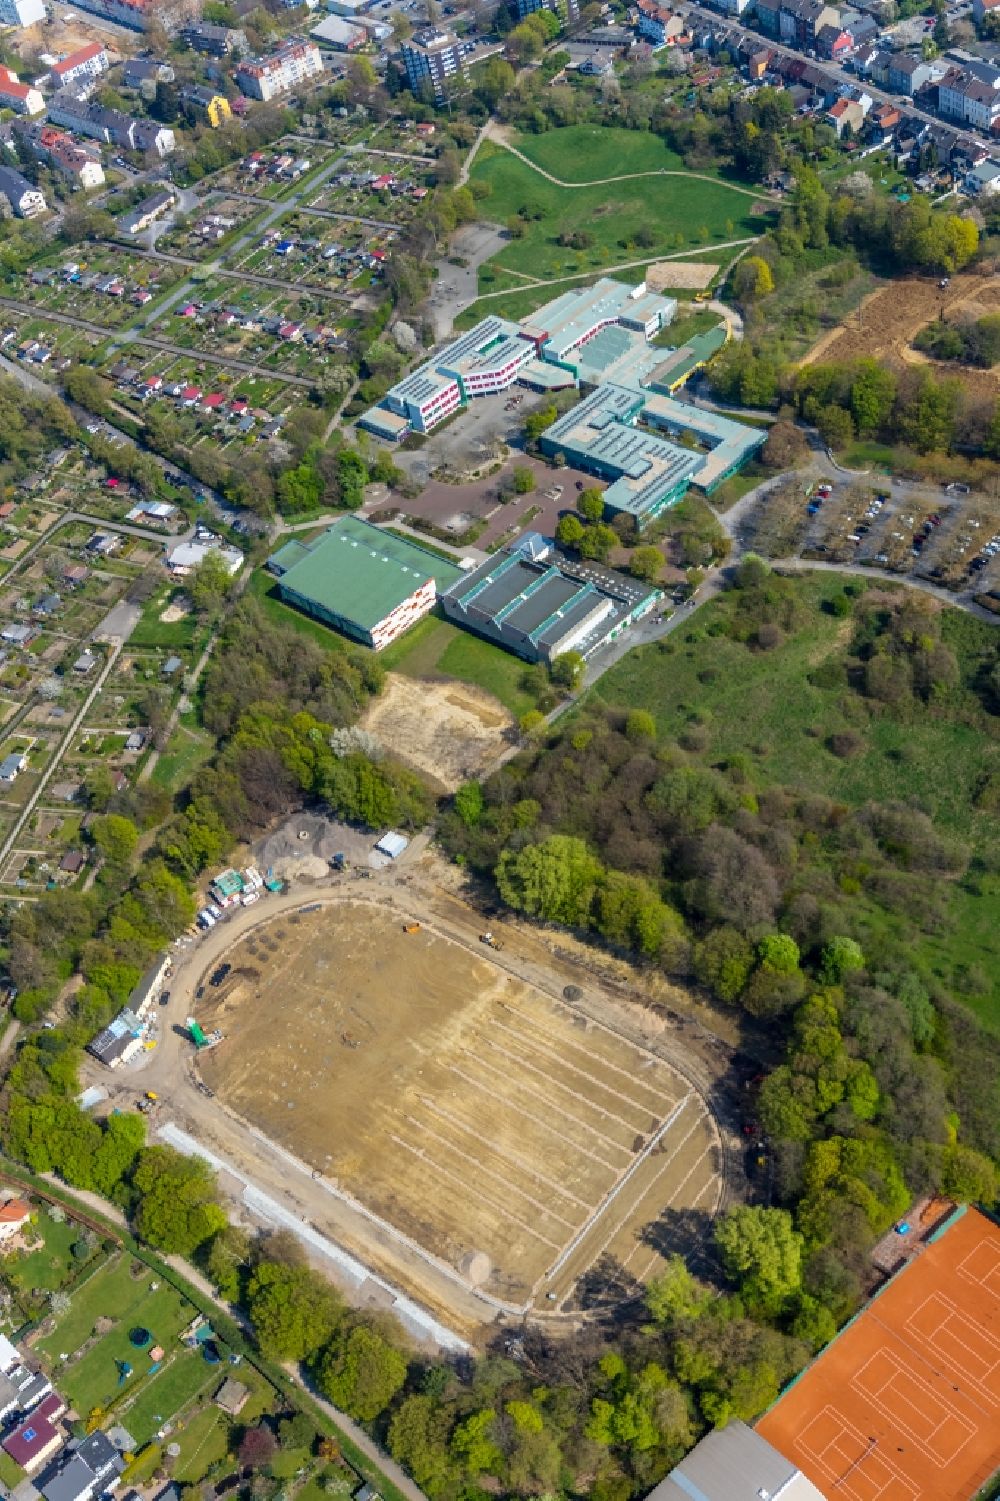 Dortmund from the bird's eye view: Extension and conversion site on the sports ground of the stadium in the district Pferdebachtal in Dortmund in the state North Rhine-Westphalia, Germany